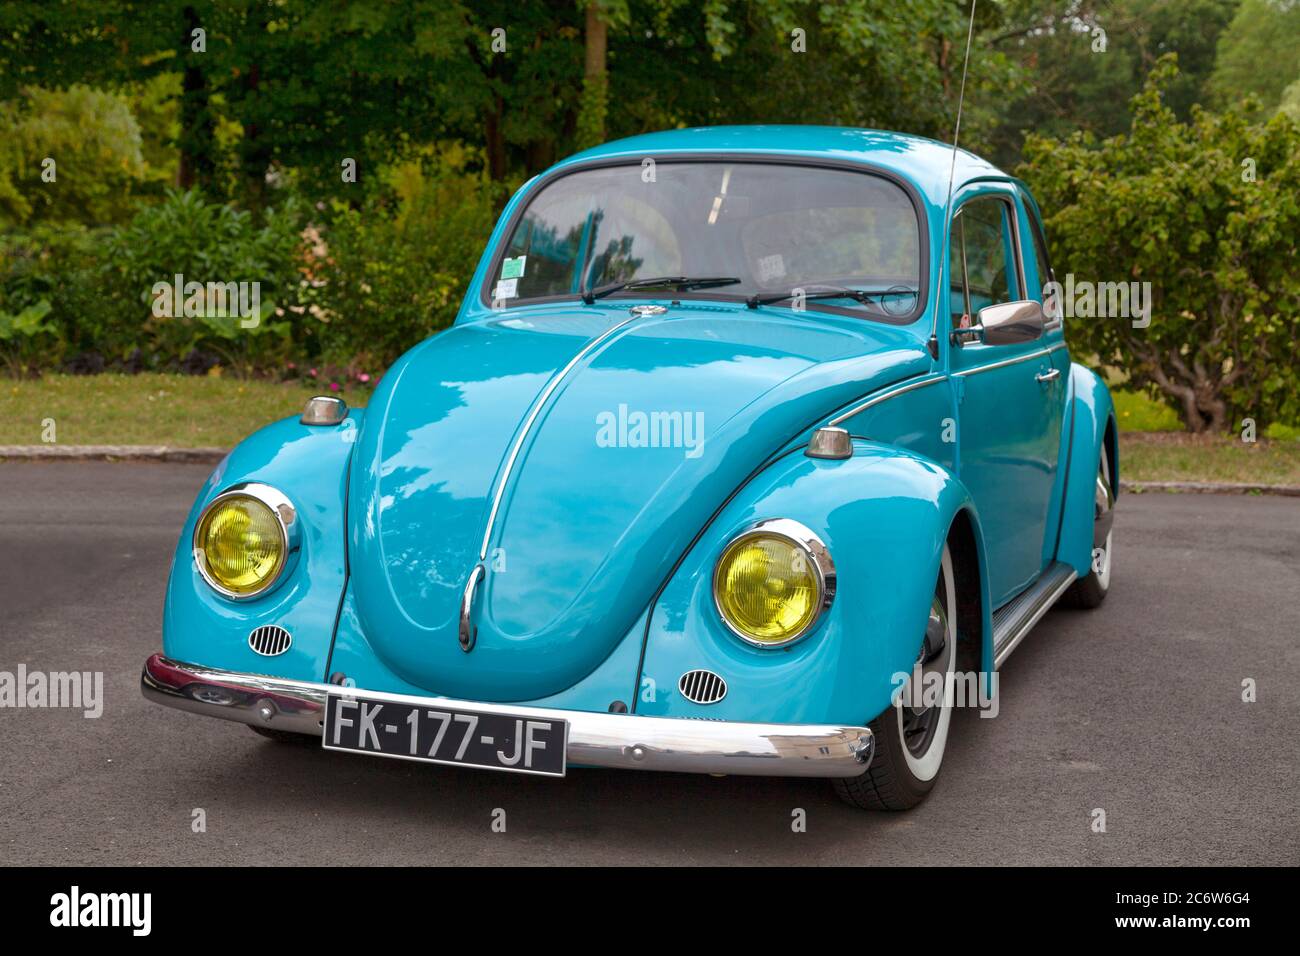 Lamorlaye, France - July 05 2020: The Volkswagen Beetle was manufactured and marketed by German automaker Volkswagen (VW) since 1938. Stock Photo